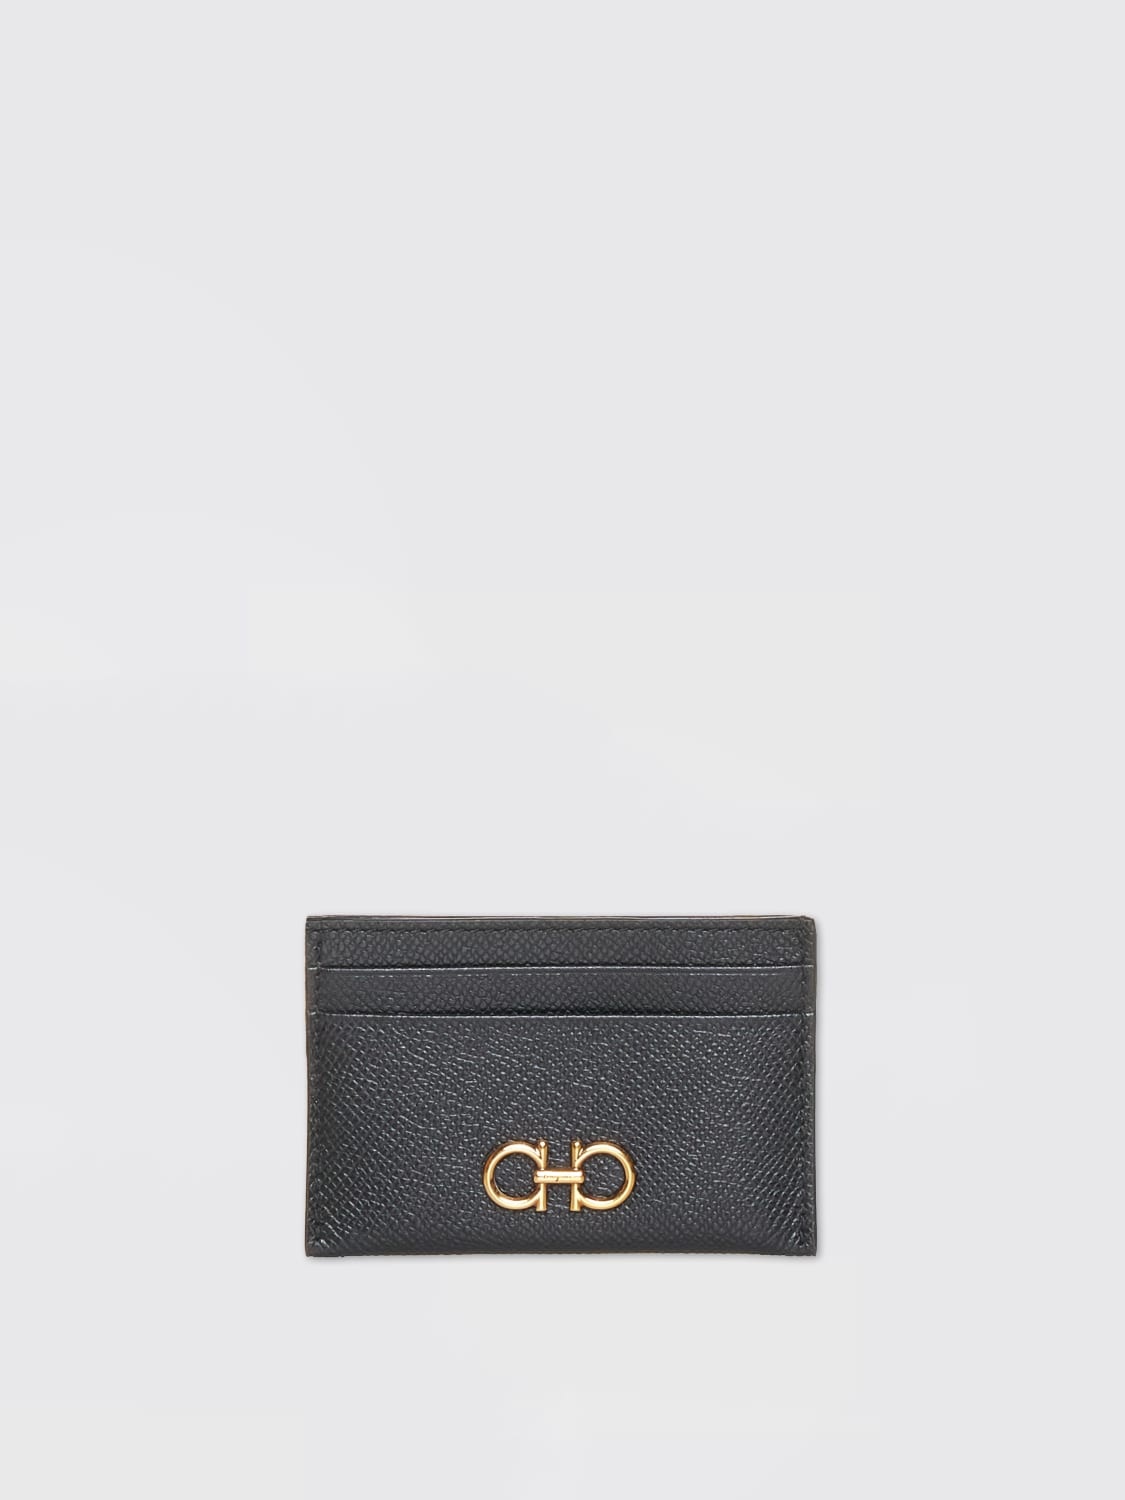 Ferragamo credit card holder in grained leather - 1